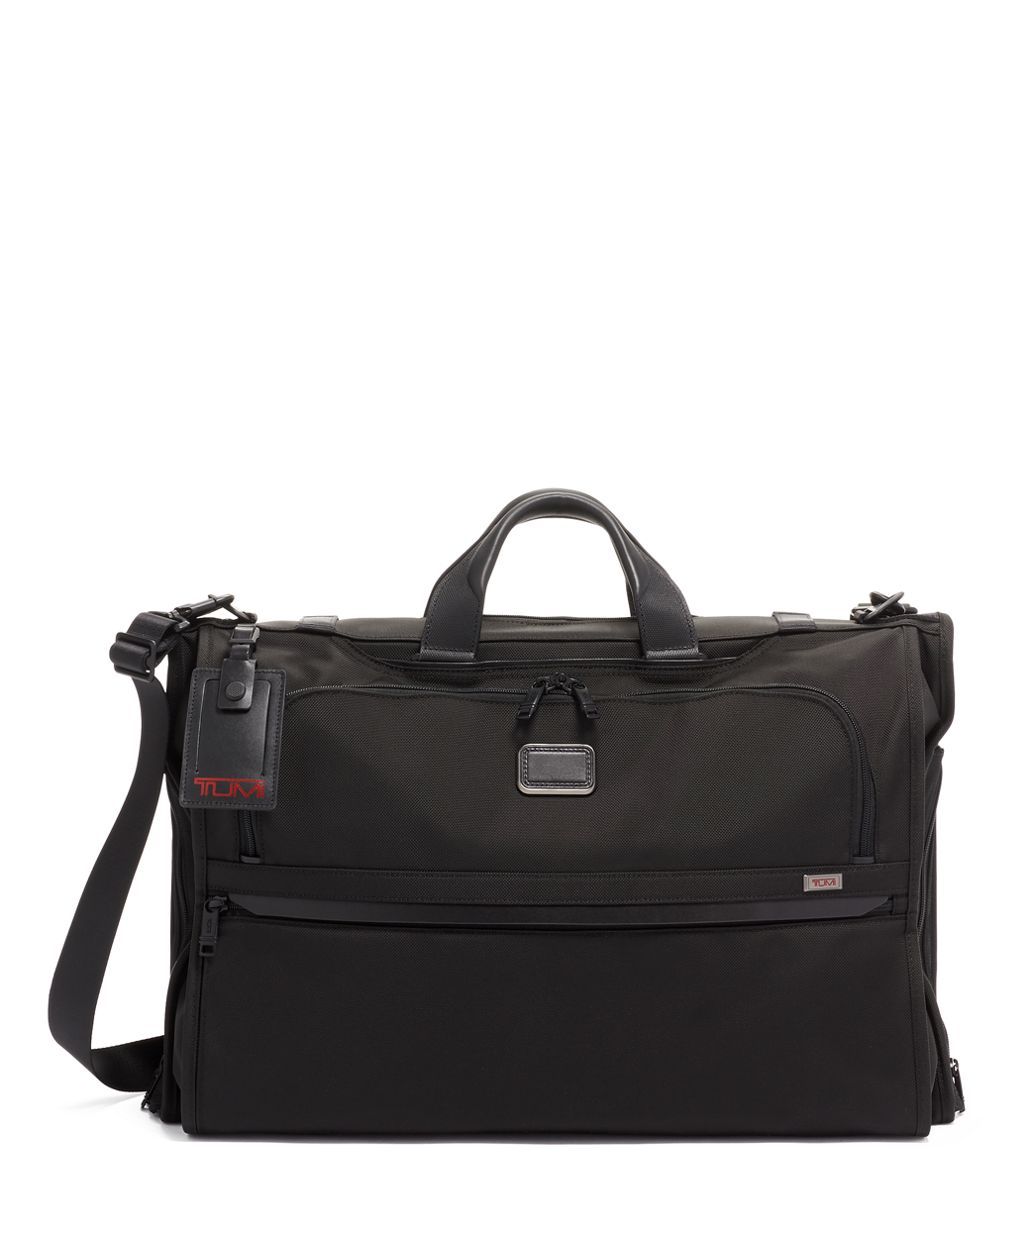 <p><strong>$750.00</strong></p><p>We agree with <em><a href="https://www.esquire.com/style/mens-accessories/g26293128/best-luggage-suitcase-brands/#product-28db011d-f935-49d7-8d0f-990819e2264f">Esquire</a></em>: "If you're a traveling businessperson, there's nothing more classic than Tumi luggage." With everything from hard-sided check-ins to soft-sided spinners, briefcases, and many more options, Tumi luggage hits that sweet spot between stylish and practical like nobody else.</p><p>The <strong>Alpha Garment Bag Tri-Fold Carry-On</strong> is just one example. It can carry up to two suits or gowns, with plenty of room left over for toiletries and business materials—plus all that swag you accumulate at events, conferences, and presentations. Then it all folds up twice into a compact 15 by 22 by 6 inches (L/W/H)—a perfect fit for an overhead compartment. Or just lay it flat in the back seat or trunk. Best of all, it's made of tough ballistic nylon designed to last for years. </p><a class="body-btn-link" href="https://www.amazon.com/Luggage-Travel-Gear-TUMI/s?rh=n%3A9479199011%2Cp_89%3ATUMI&tag=syndication-20&ascsubtag=%5Bartid%7C10064.g.44130437%5Bsrc%7Cmsn-us">buy tumi at amazon</a>